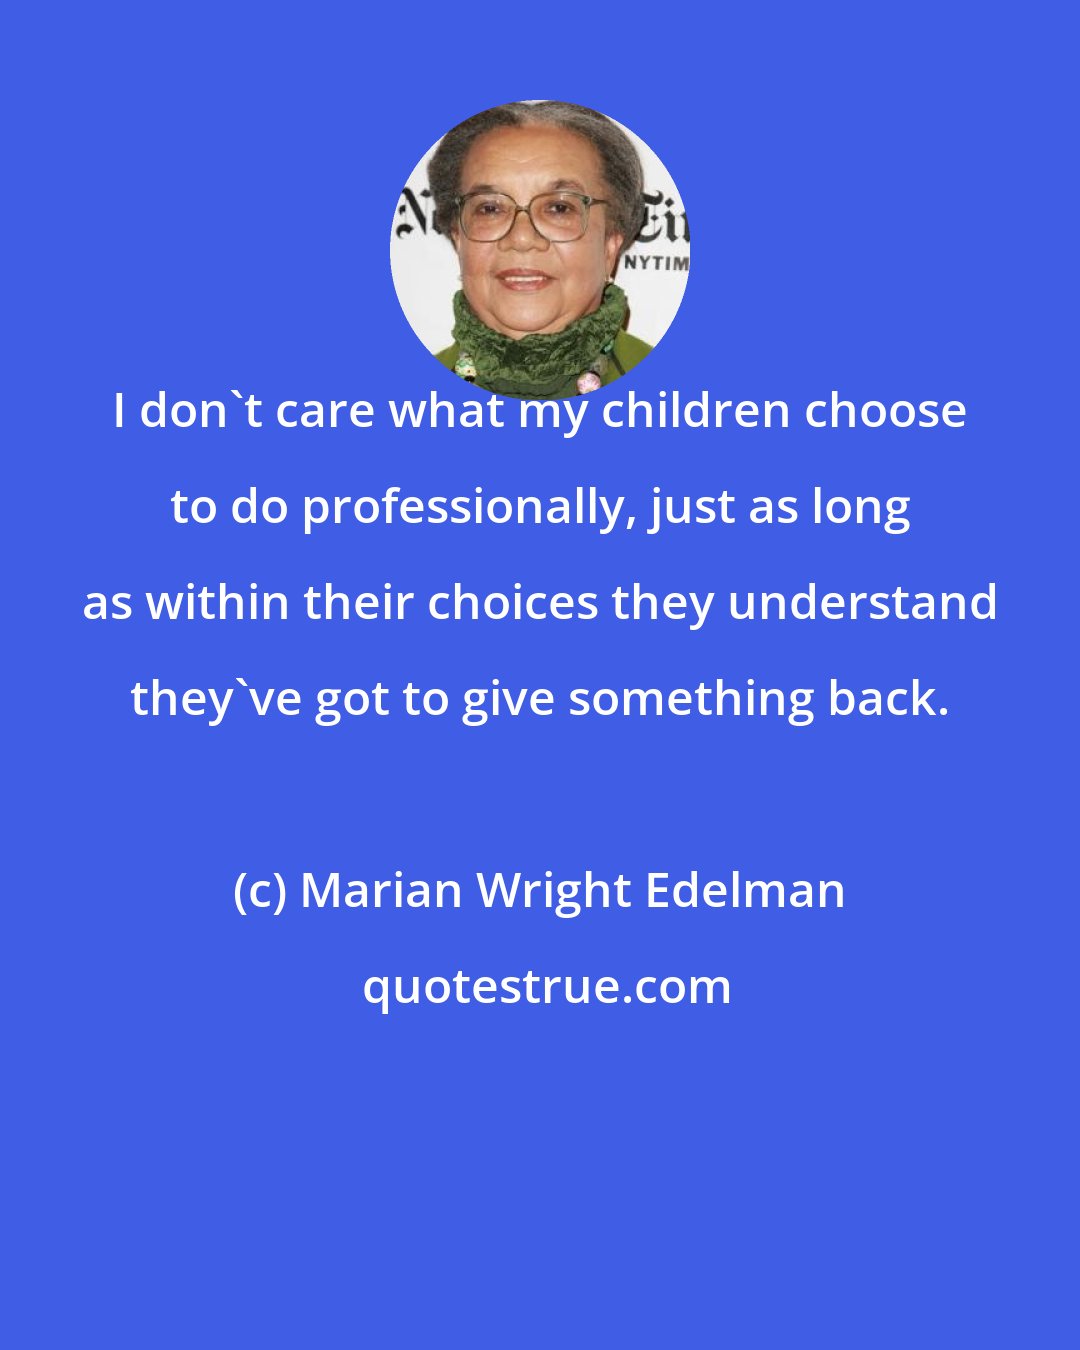 Marian Wright Edelman: I don't care what my children choose to do professionally, just as long as within their choices they understand they've got to give something back.